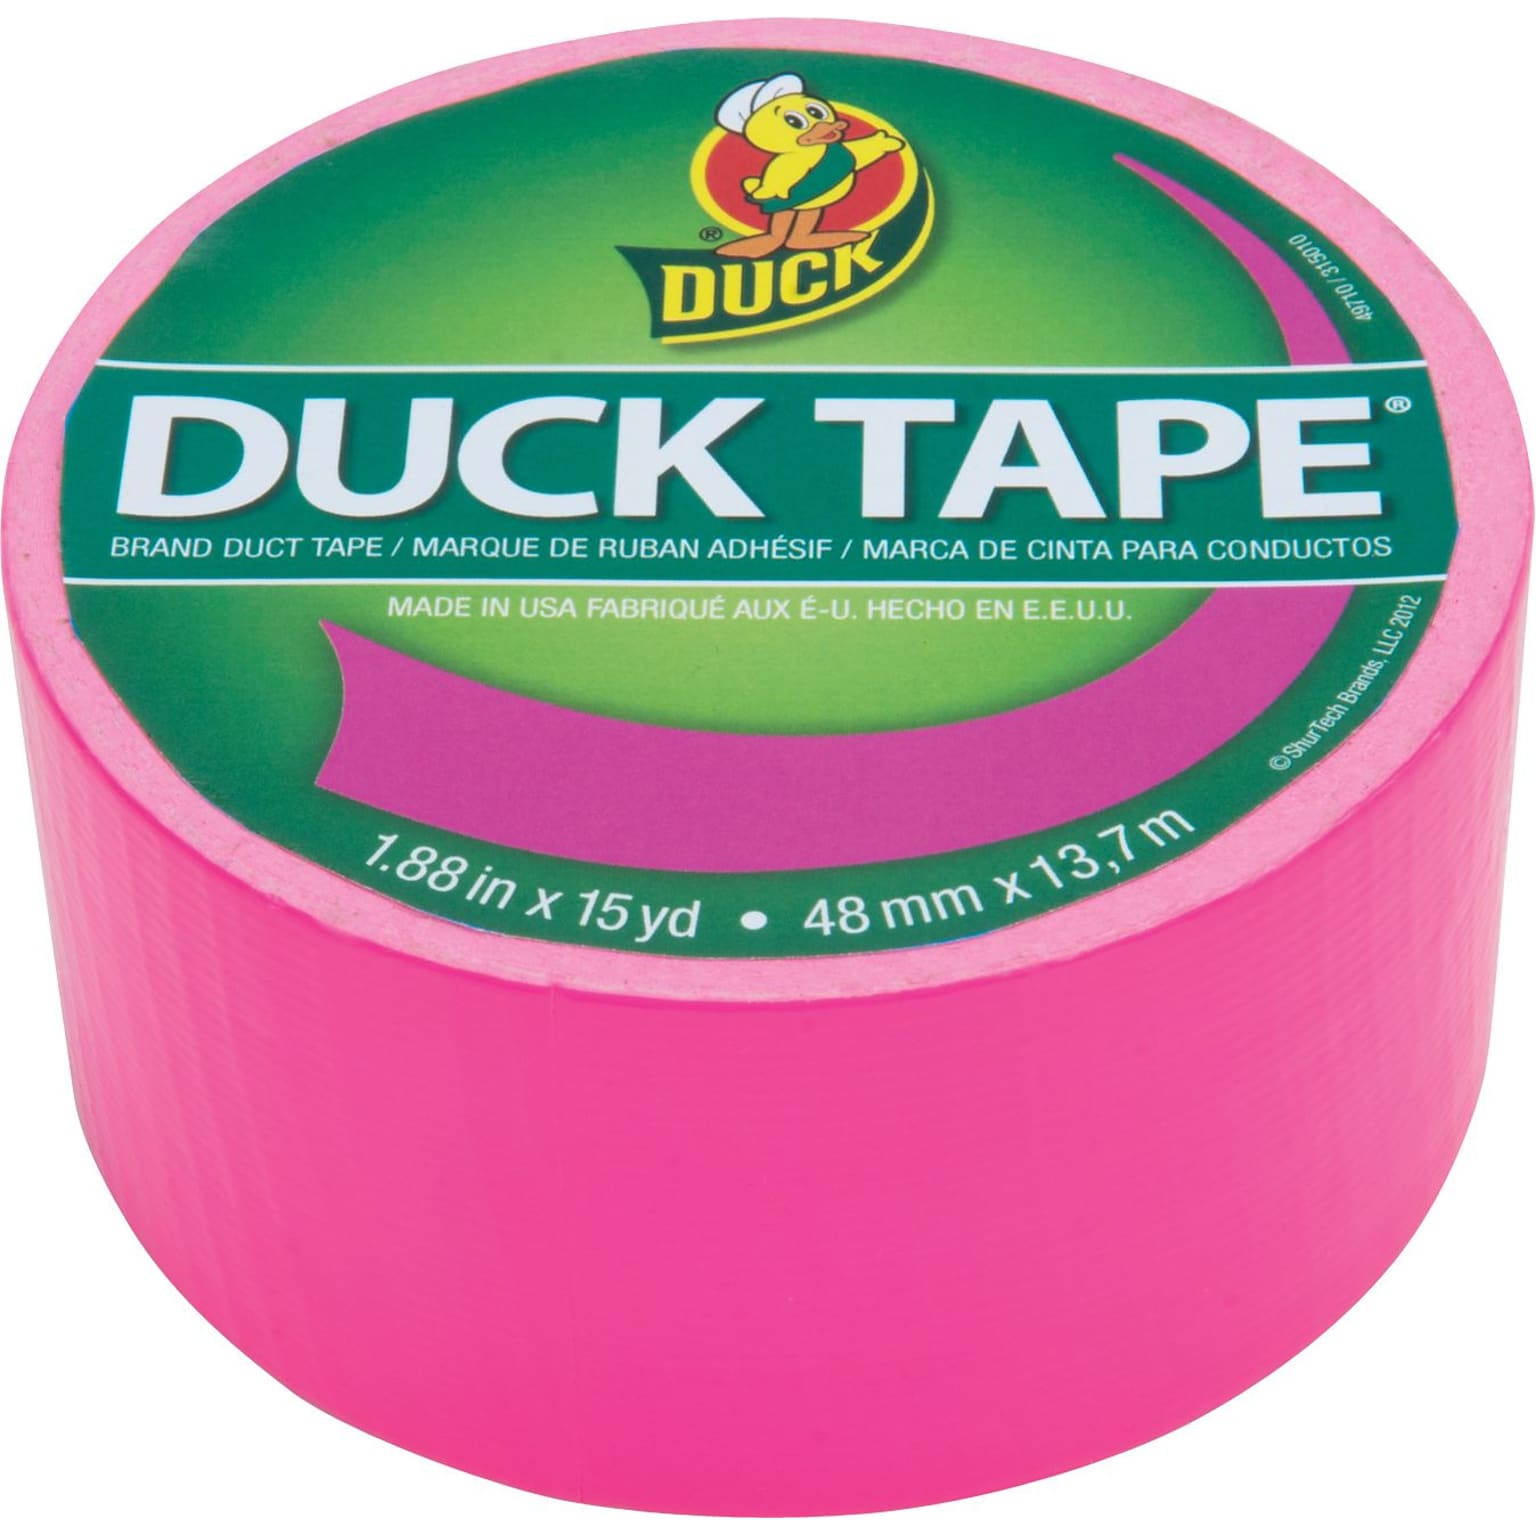 Duck Tape® Brand Duct Tape, Funky Flamingo X-Factor™, 1.88 x 15 Yards